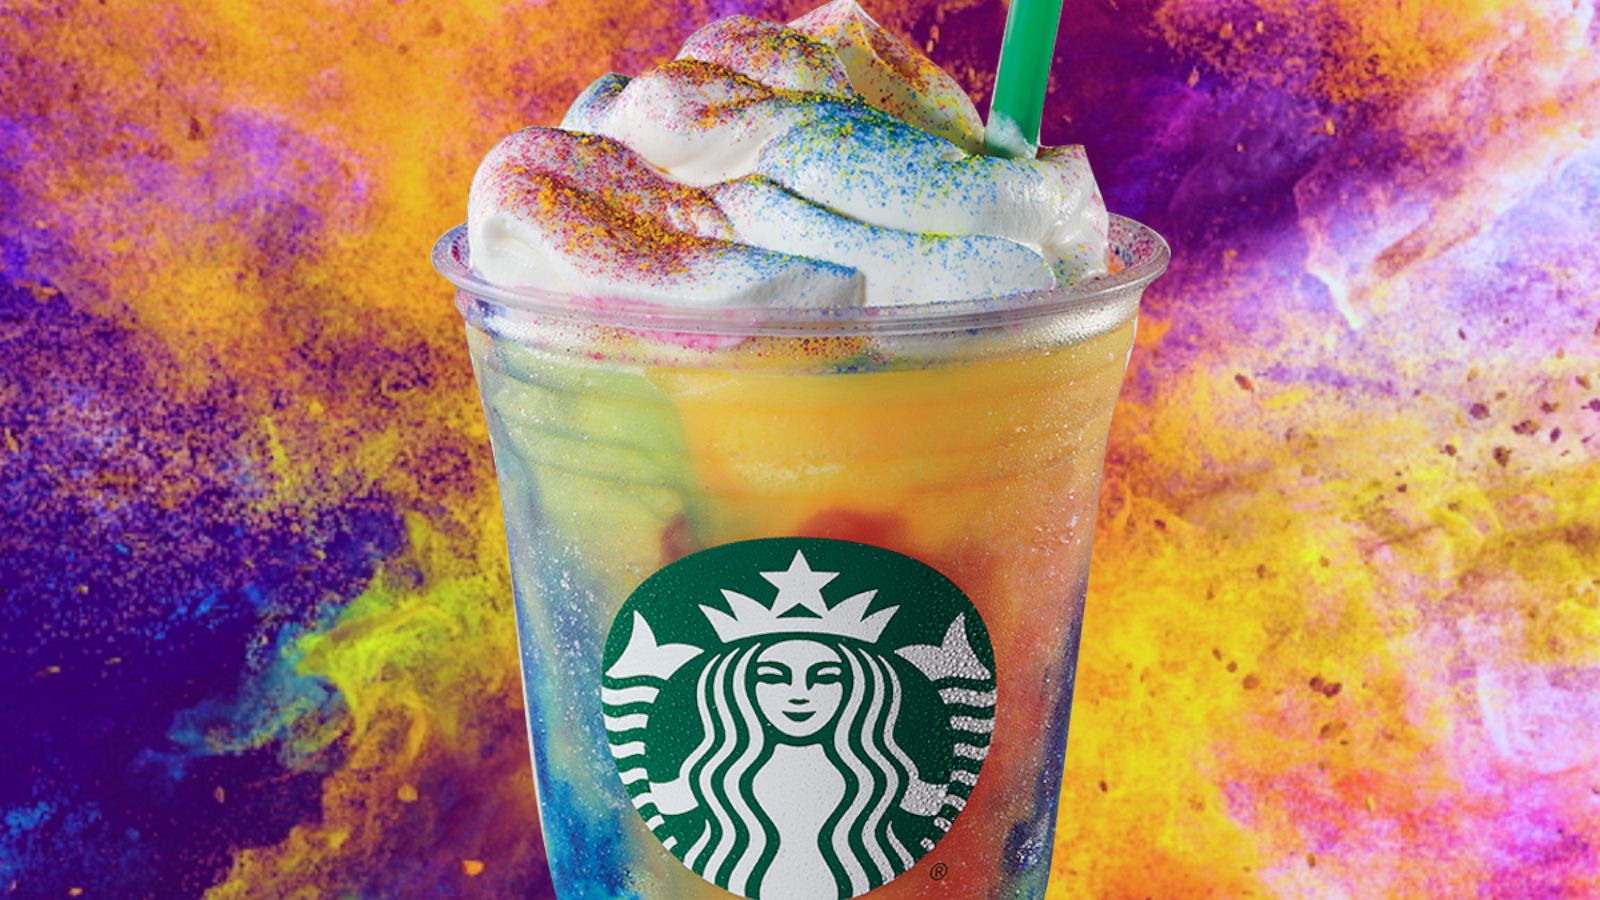 Starbucks Debuts Colorful New Tie Dye Frappuccino For Summer